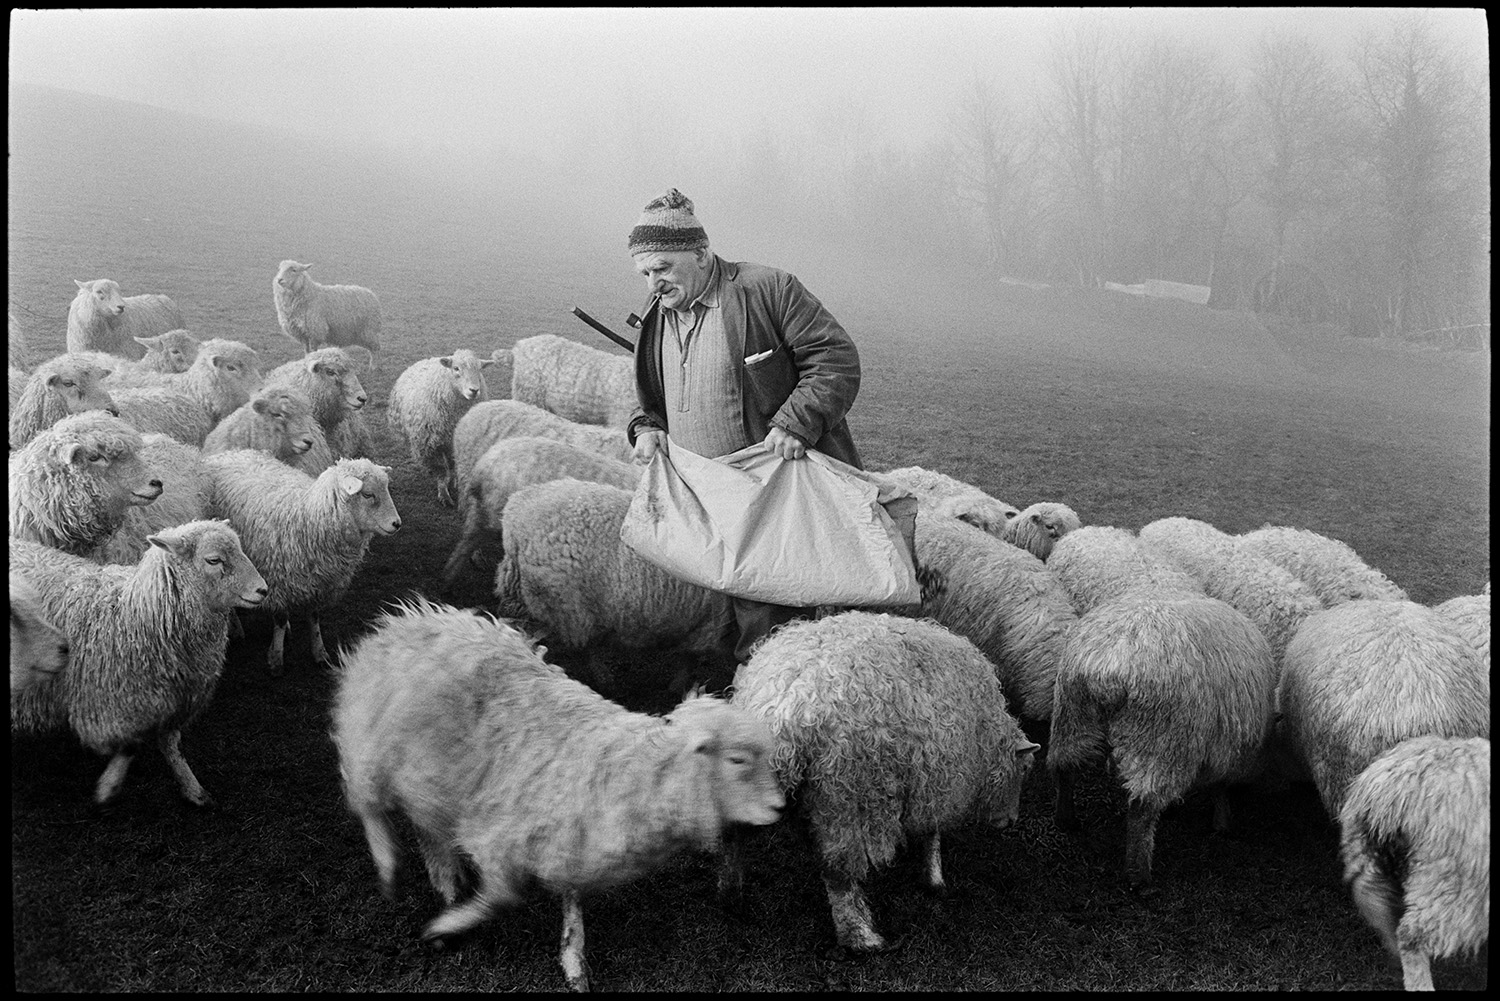 Farmer feeding sheep, misty morning.
[Archie Parkhouse feeding his sheep in a field on a misty morning at Millhams, Dolton. He is smoking a pipe]